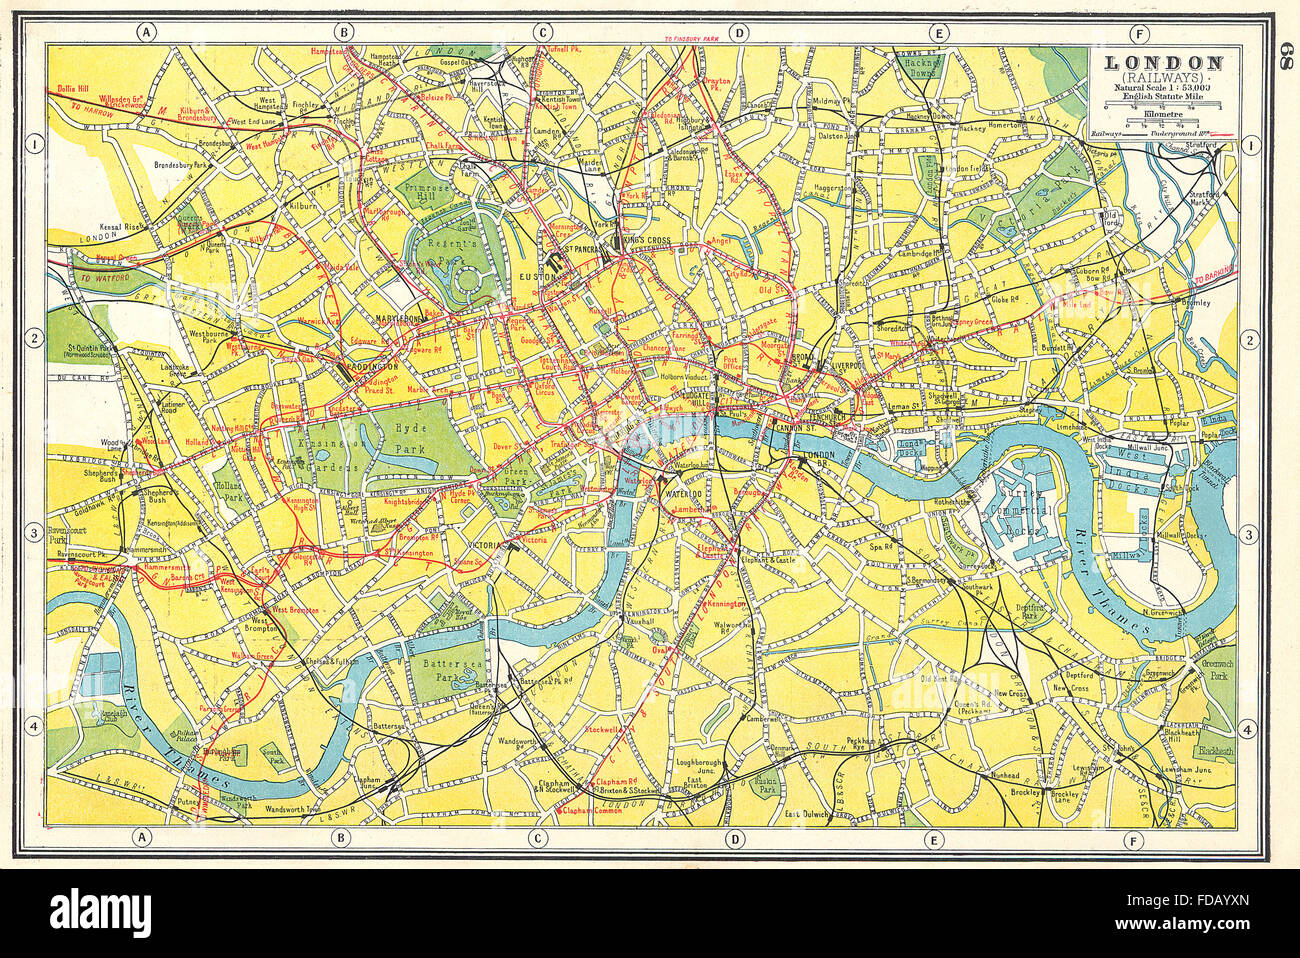 LONDON: Showing railways and underground tube lines. HARMSWORTH, 1920 old map Stock Photo